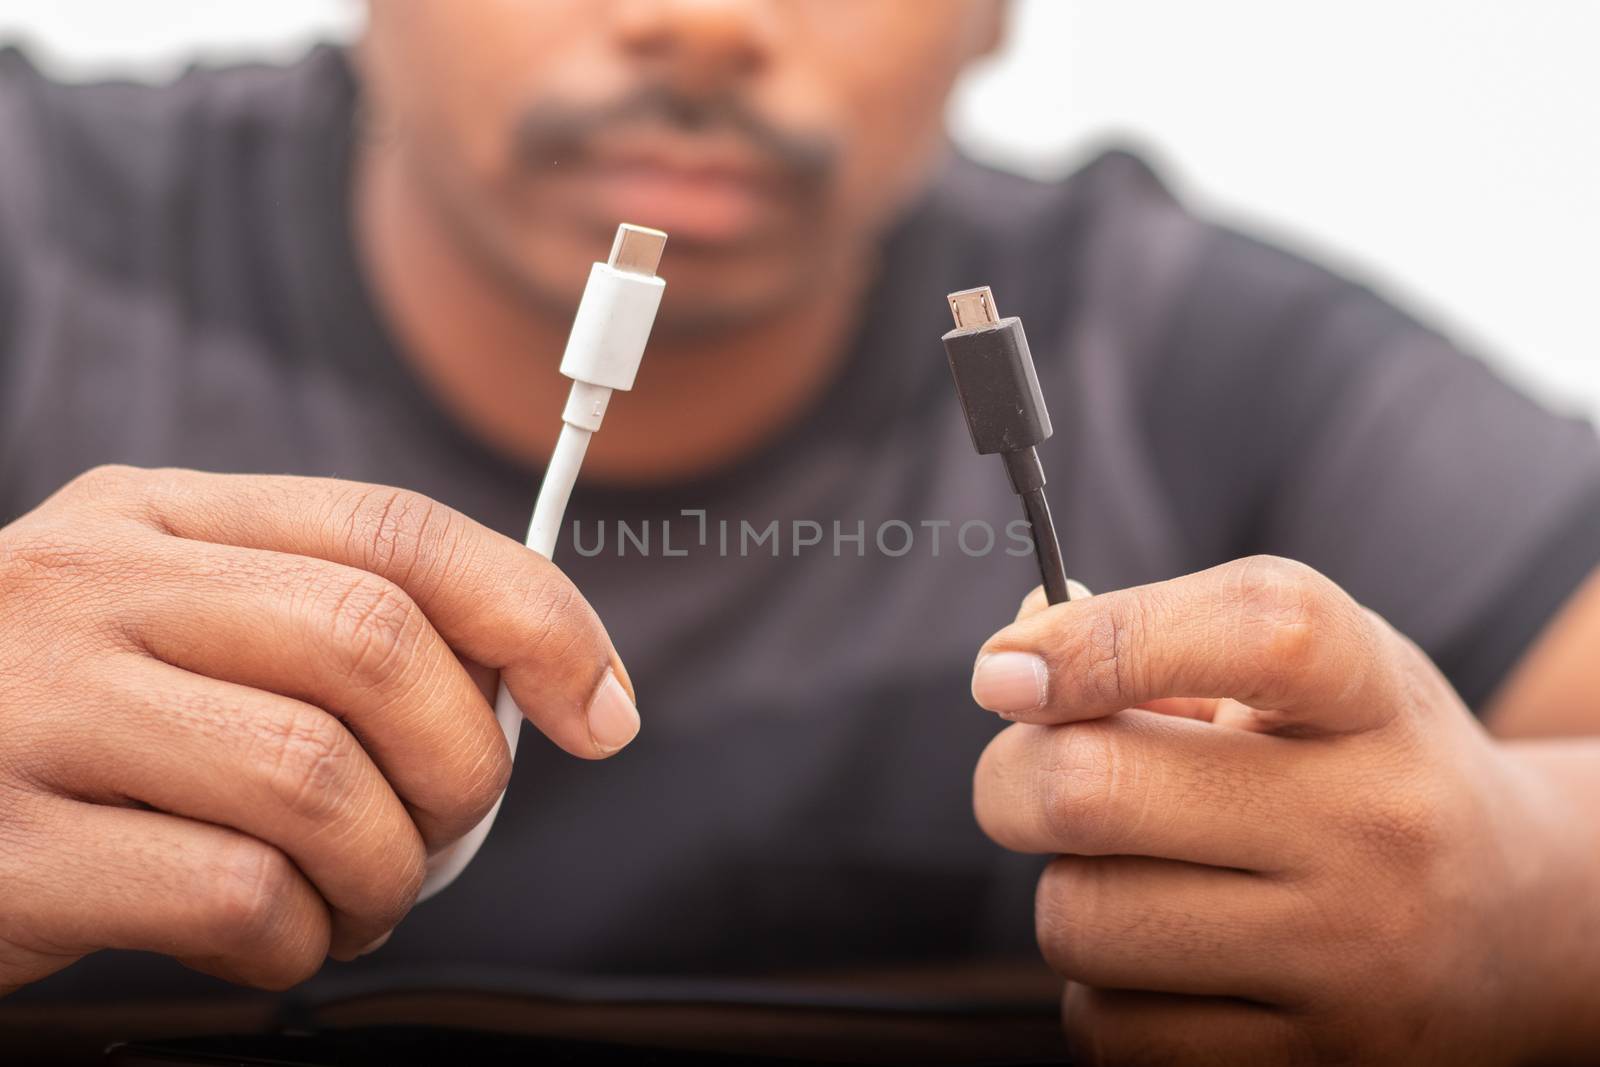 Selective focus on hands holding micro usb and USB type C ports concepts showing of confusion on charging ports